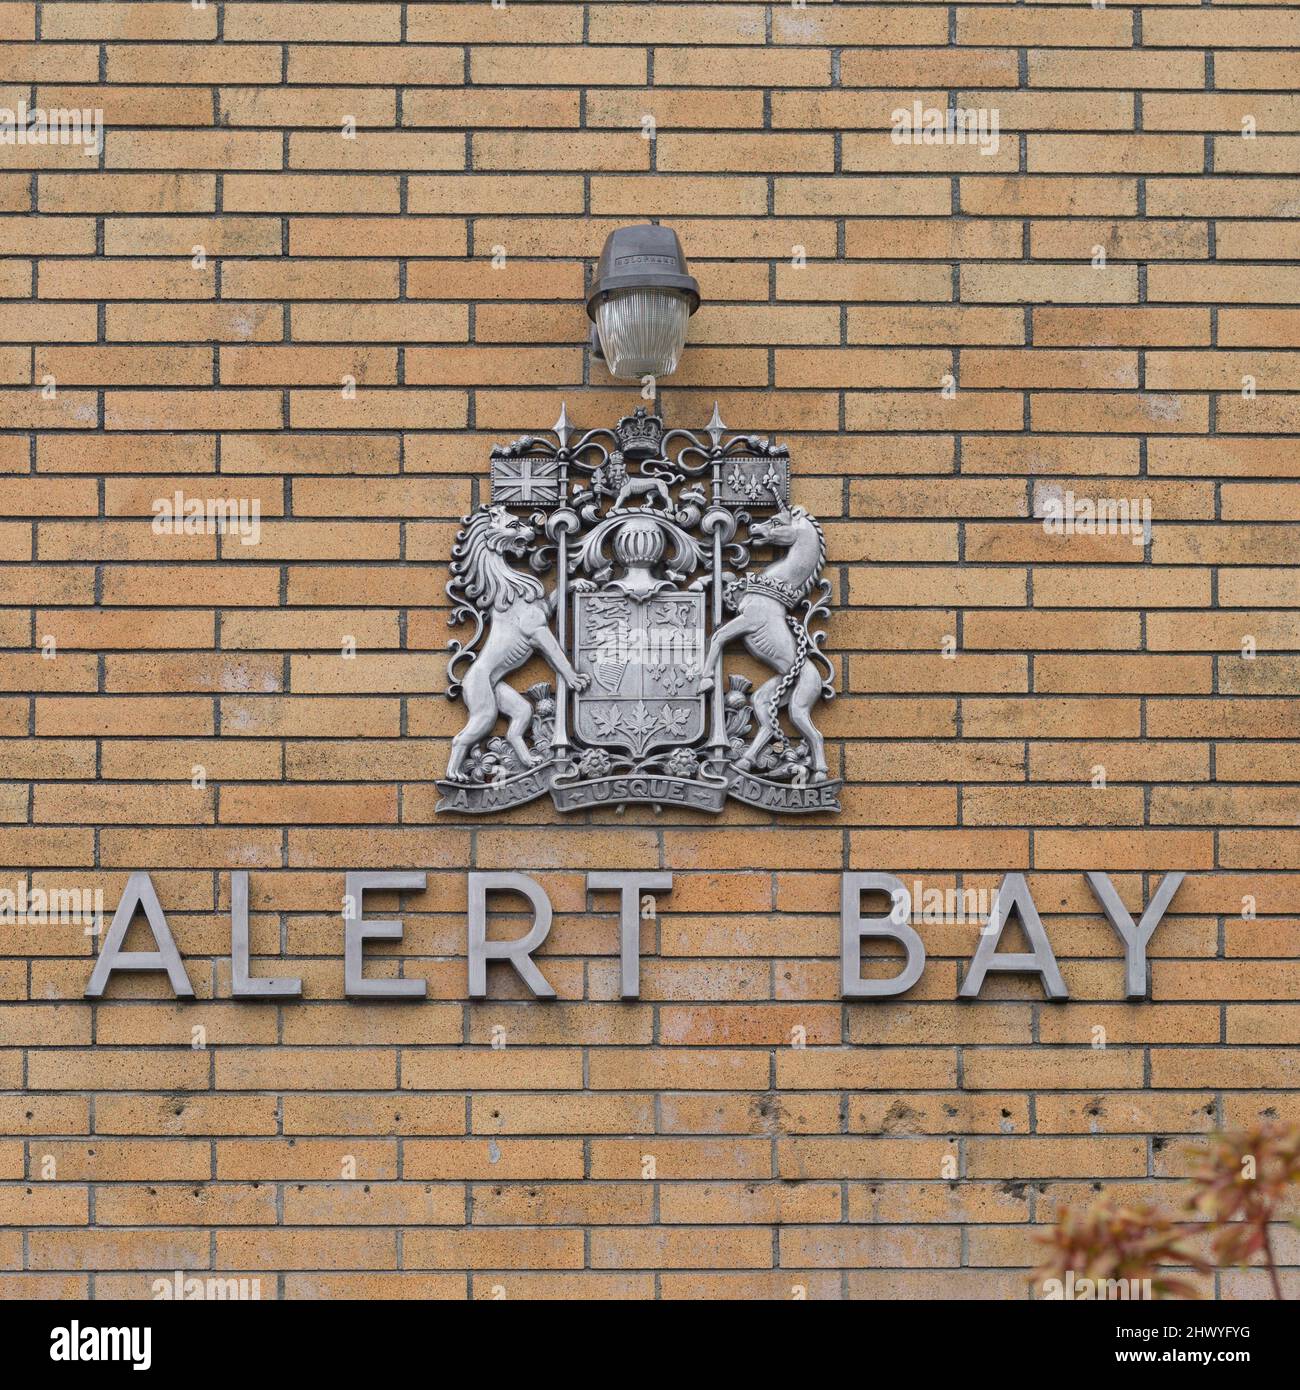 Alert Bay emblem and sign on a brick wall in Cormorant Island, British Columbia, Canada Stock Photo